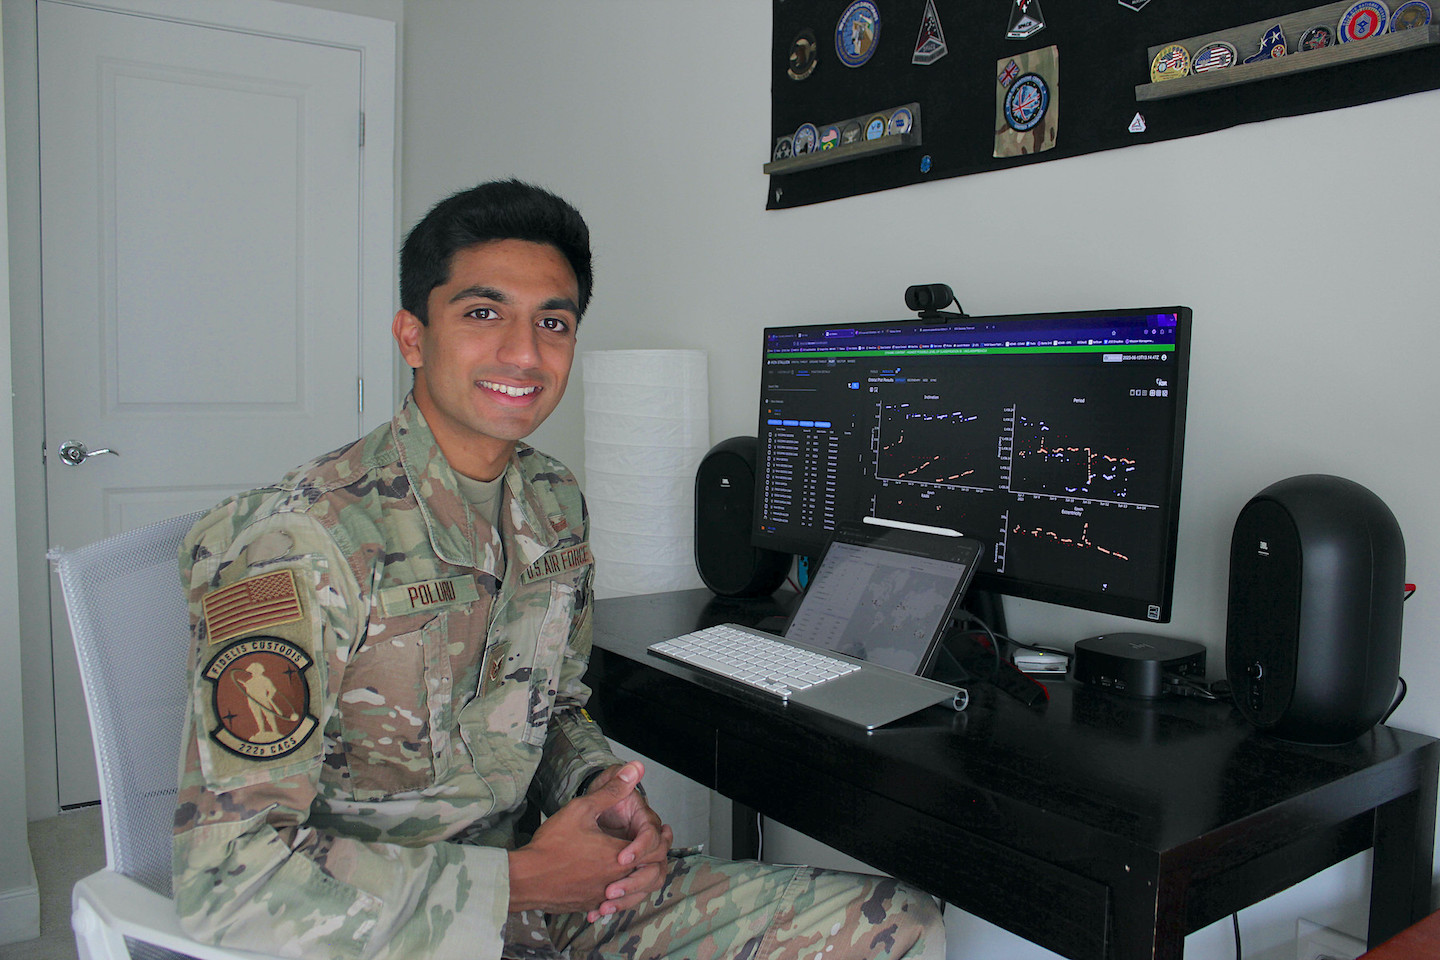 Senior Airman Dhruva Poluru, who has been recognized as the Airman of the Year for the entire Air National Guard, working from his remote office in Chantilly, Virginia. Poluru currently serves with the 222 Command and Control Squadron, a geographically separated unit under the command of the 107th Attack Wing. (U.S. Air National Guard photo by 1st Lt. Jason Carr).